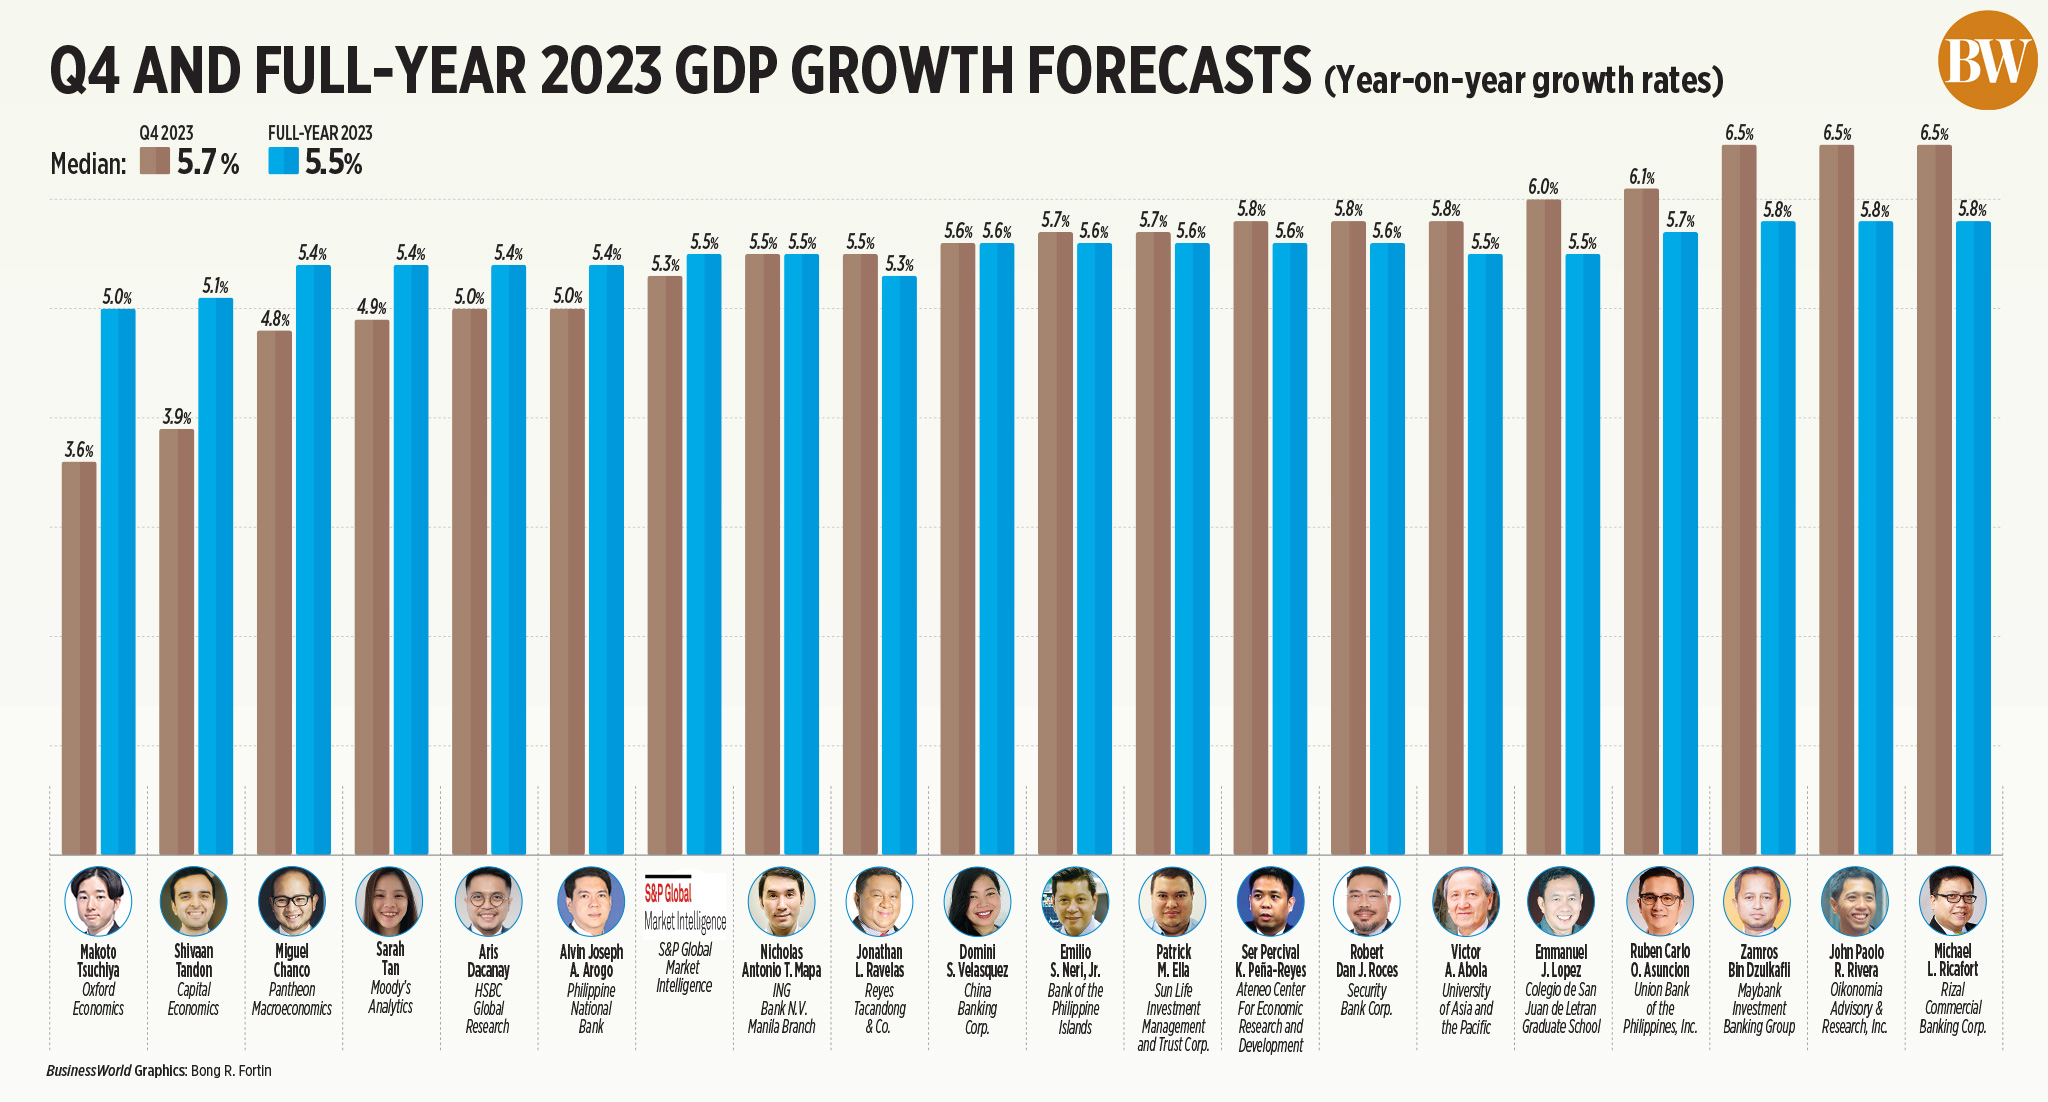 Q4 and Full-year 2023 GDP Growth Forecasts